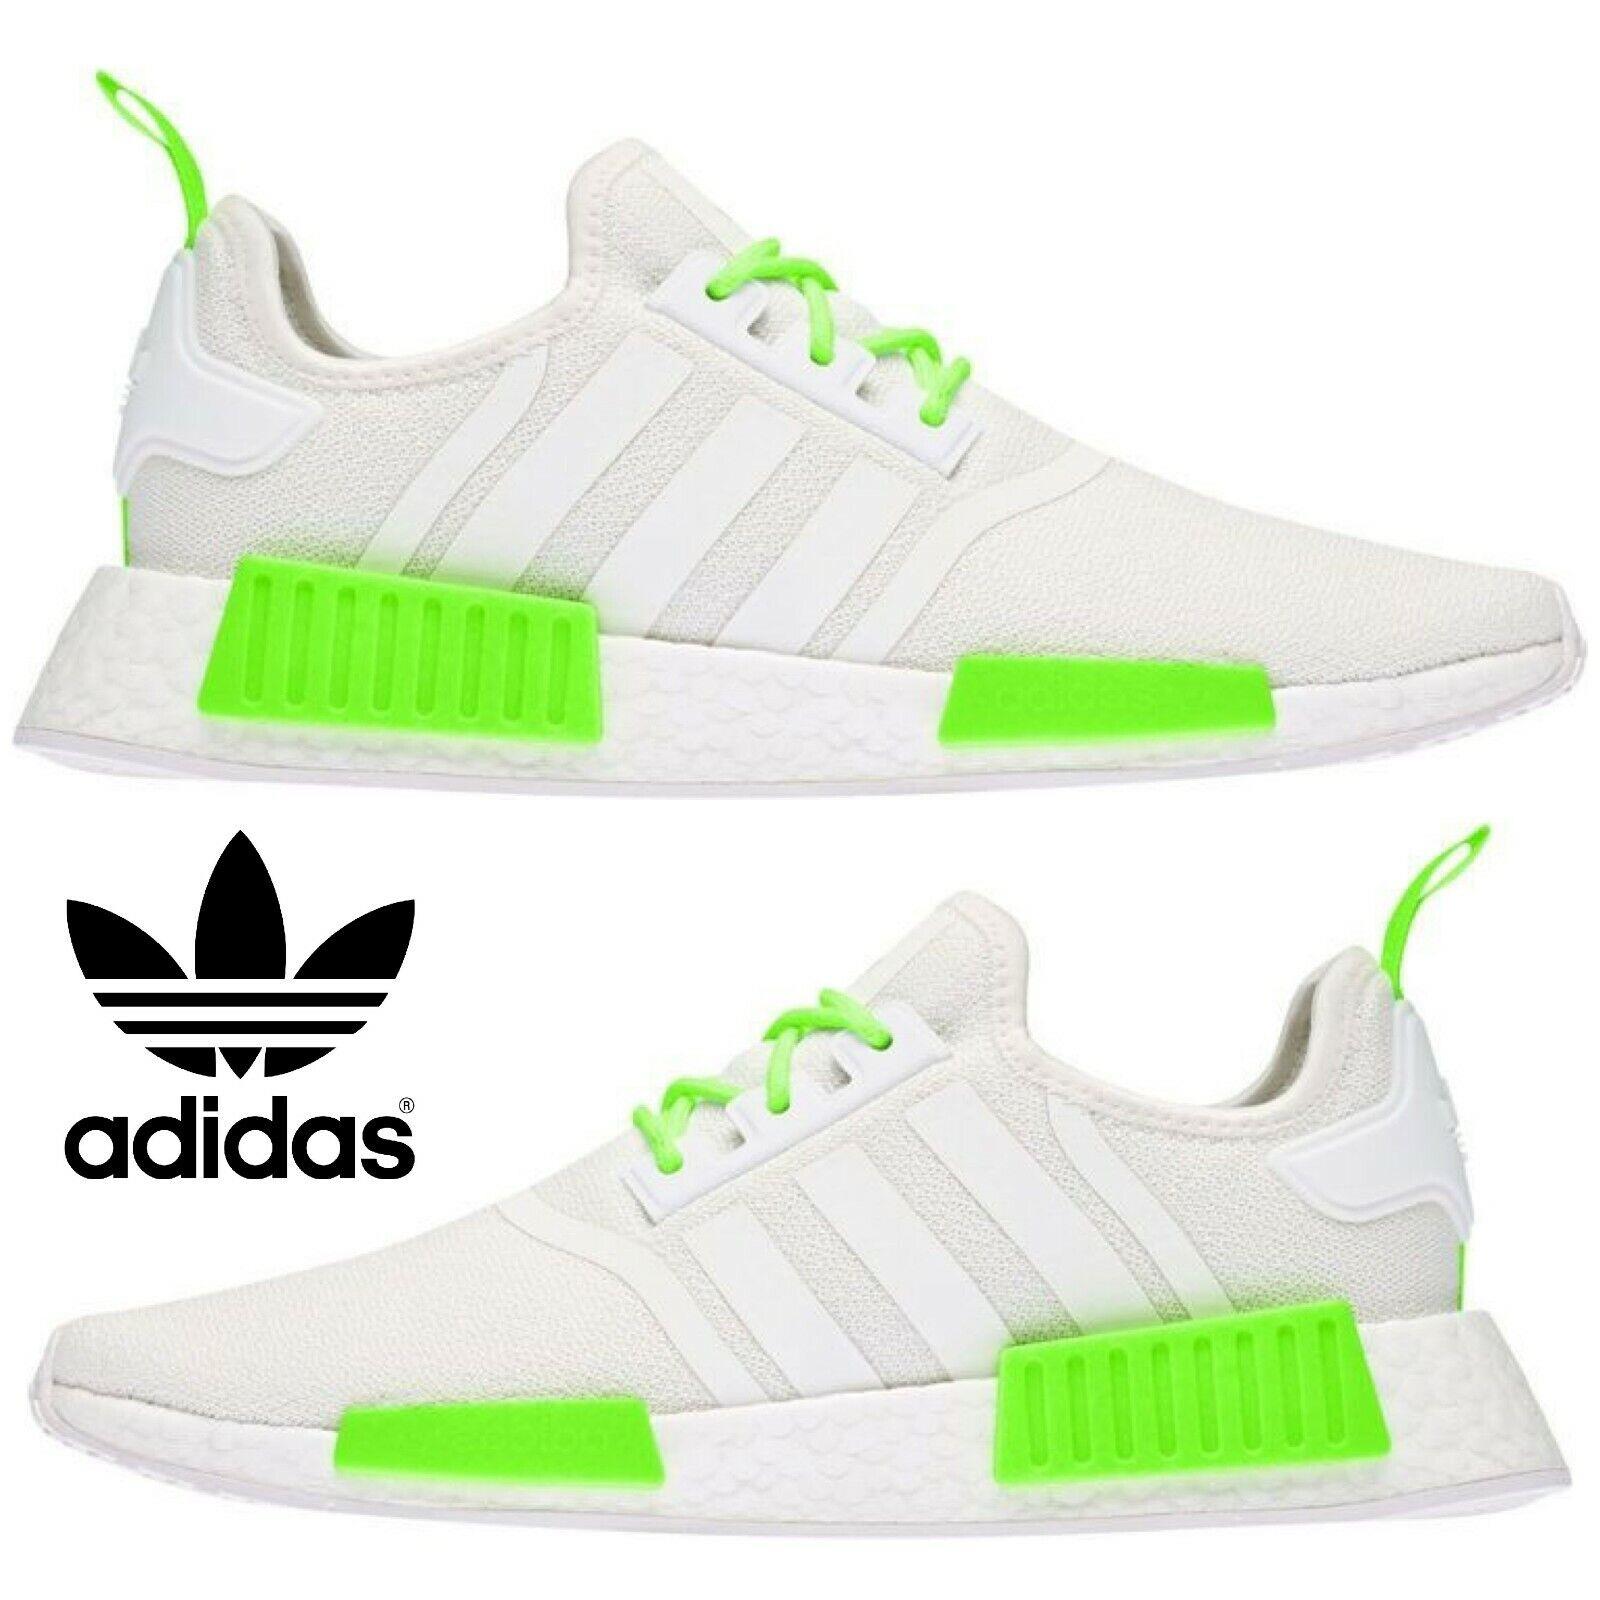 Adidas Originals Nmd R1 Men`s Sneakers Running Shoes Gym Casual Sport Gray Neon - Gray , GREY/NEON GREEN Manufacturer